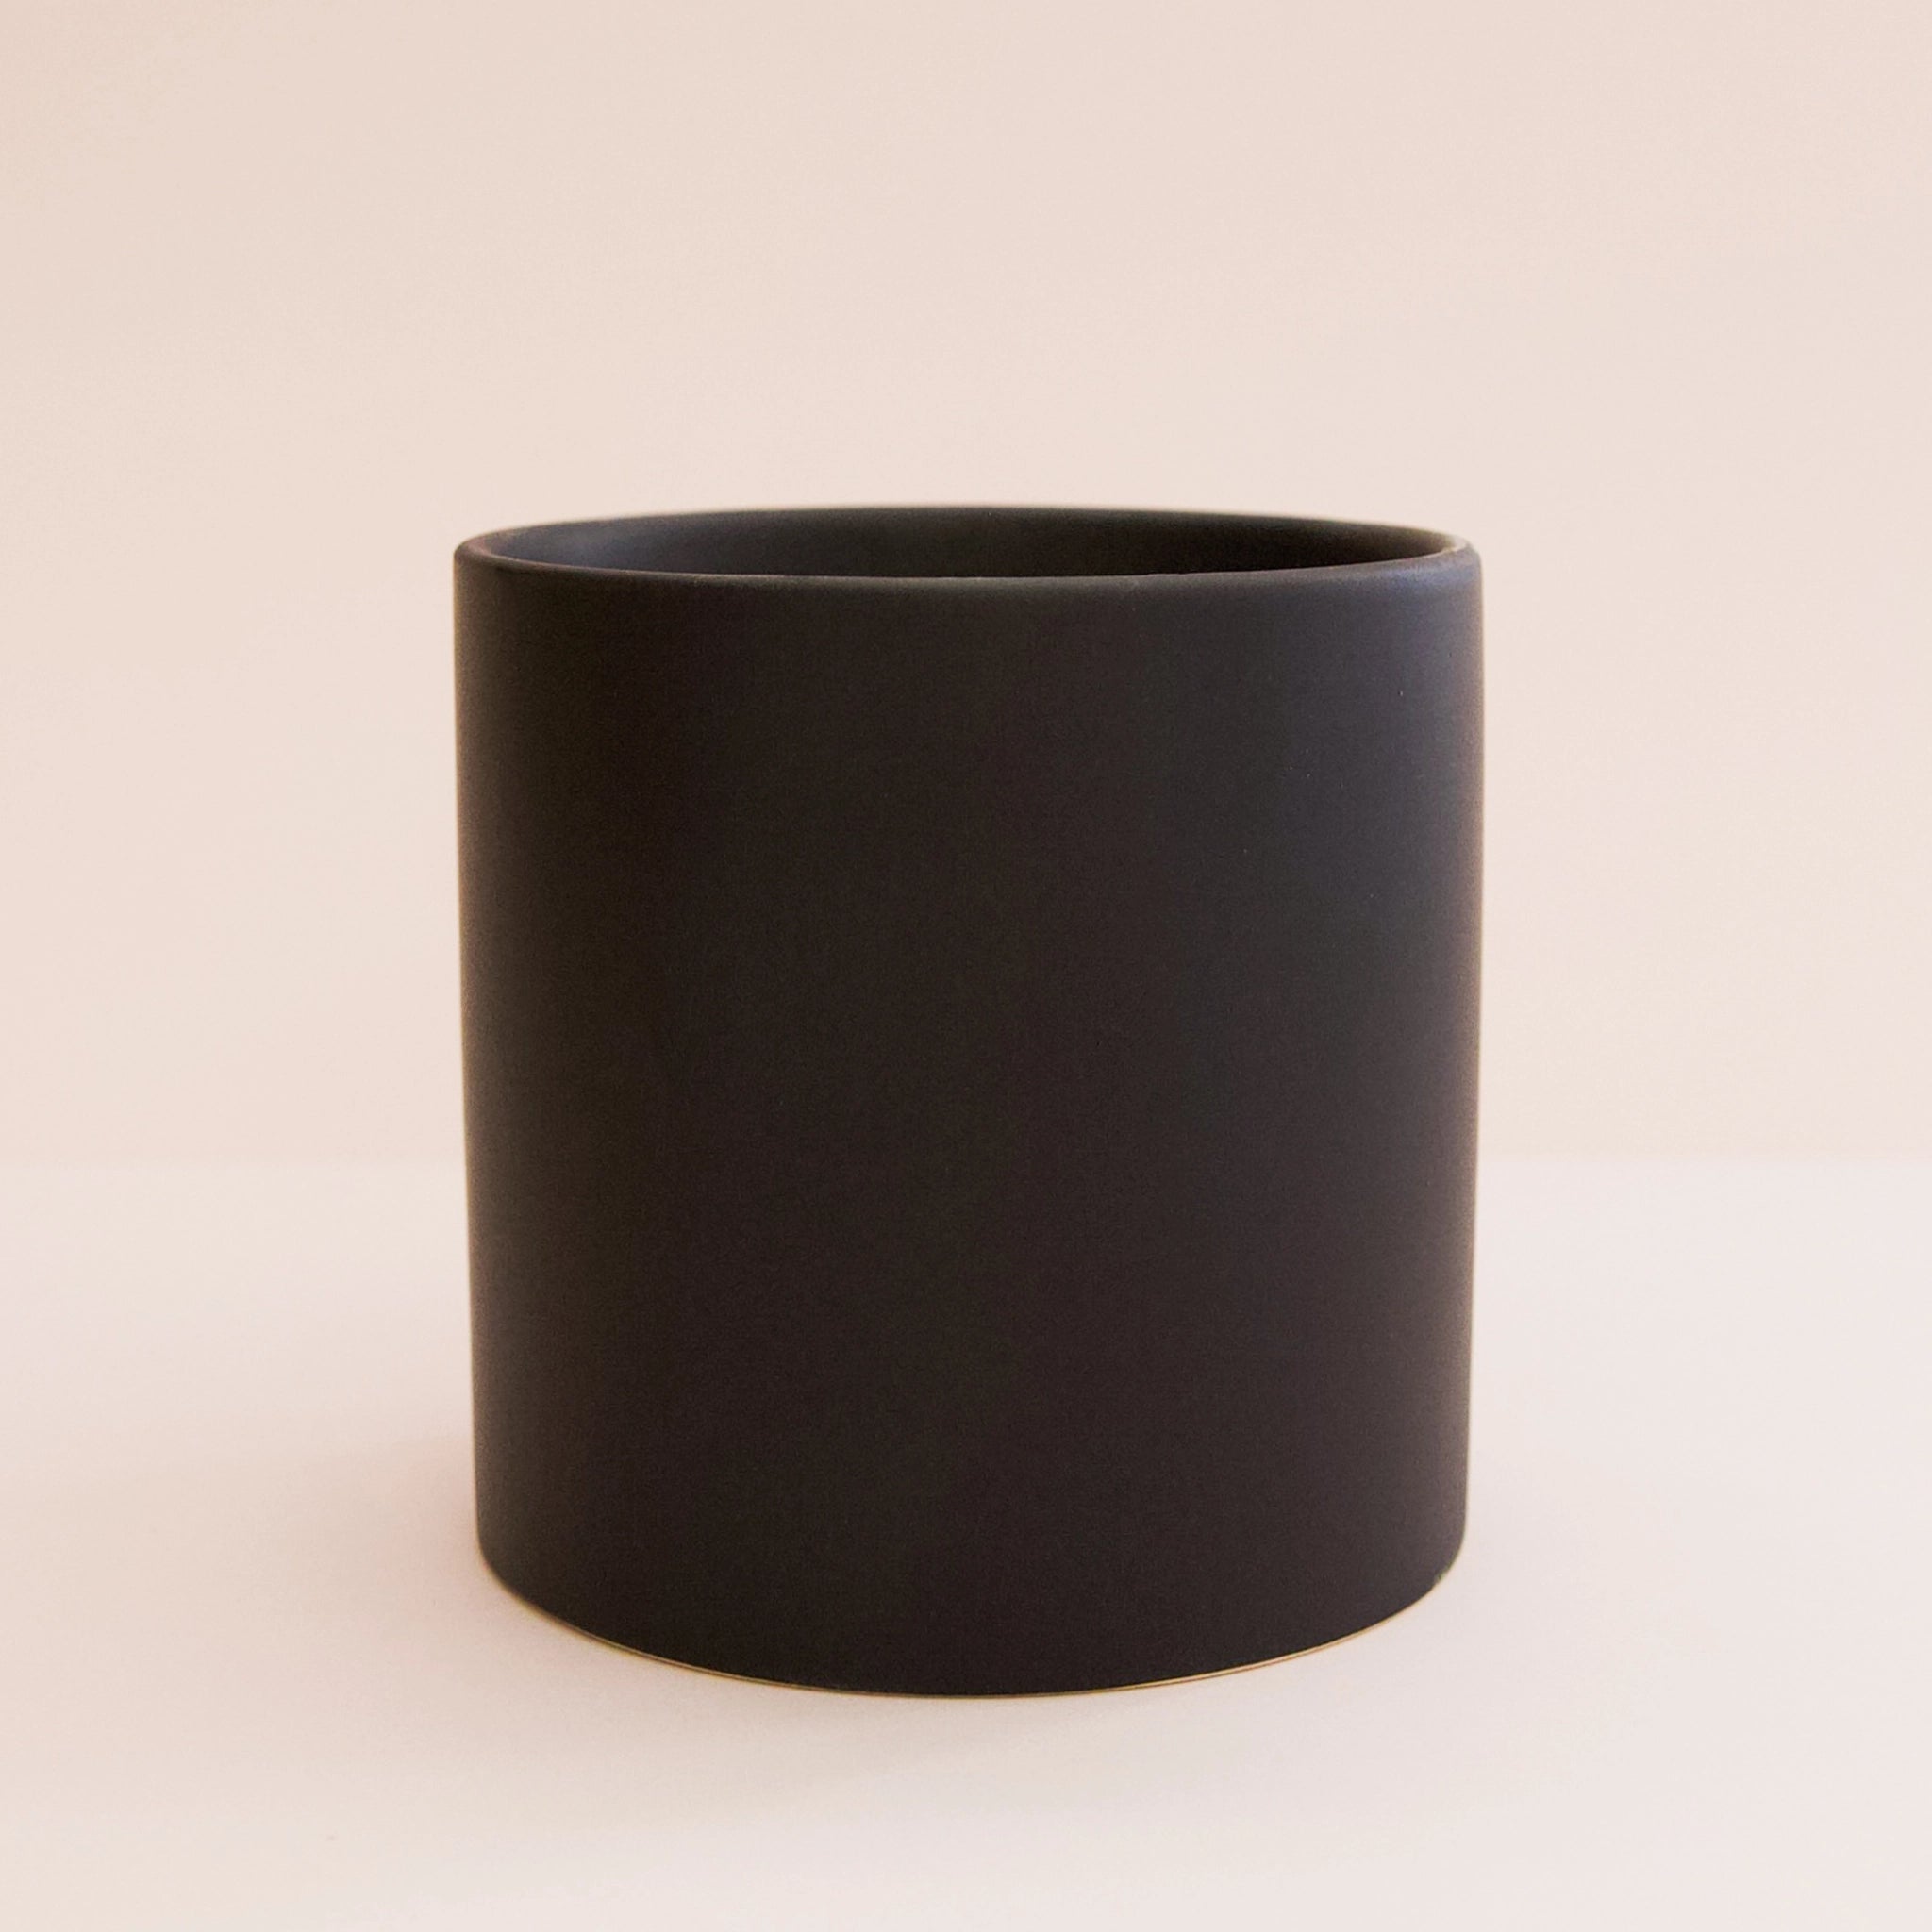 On a white background is a matte black circle ceramic planter.